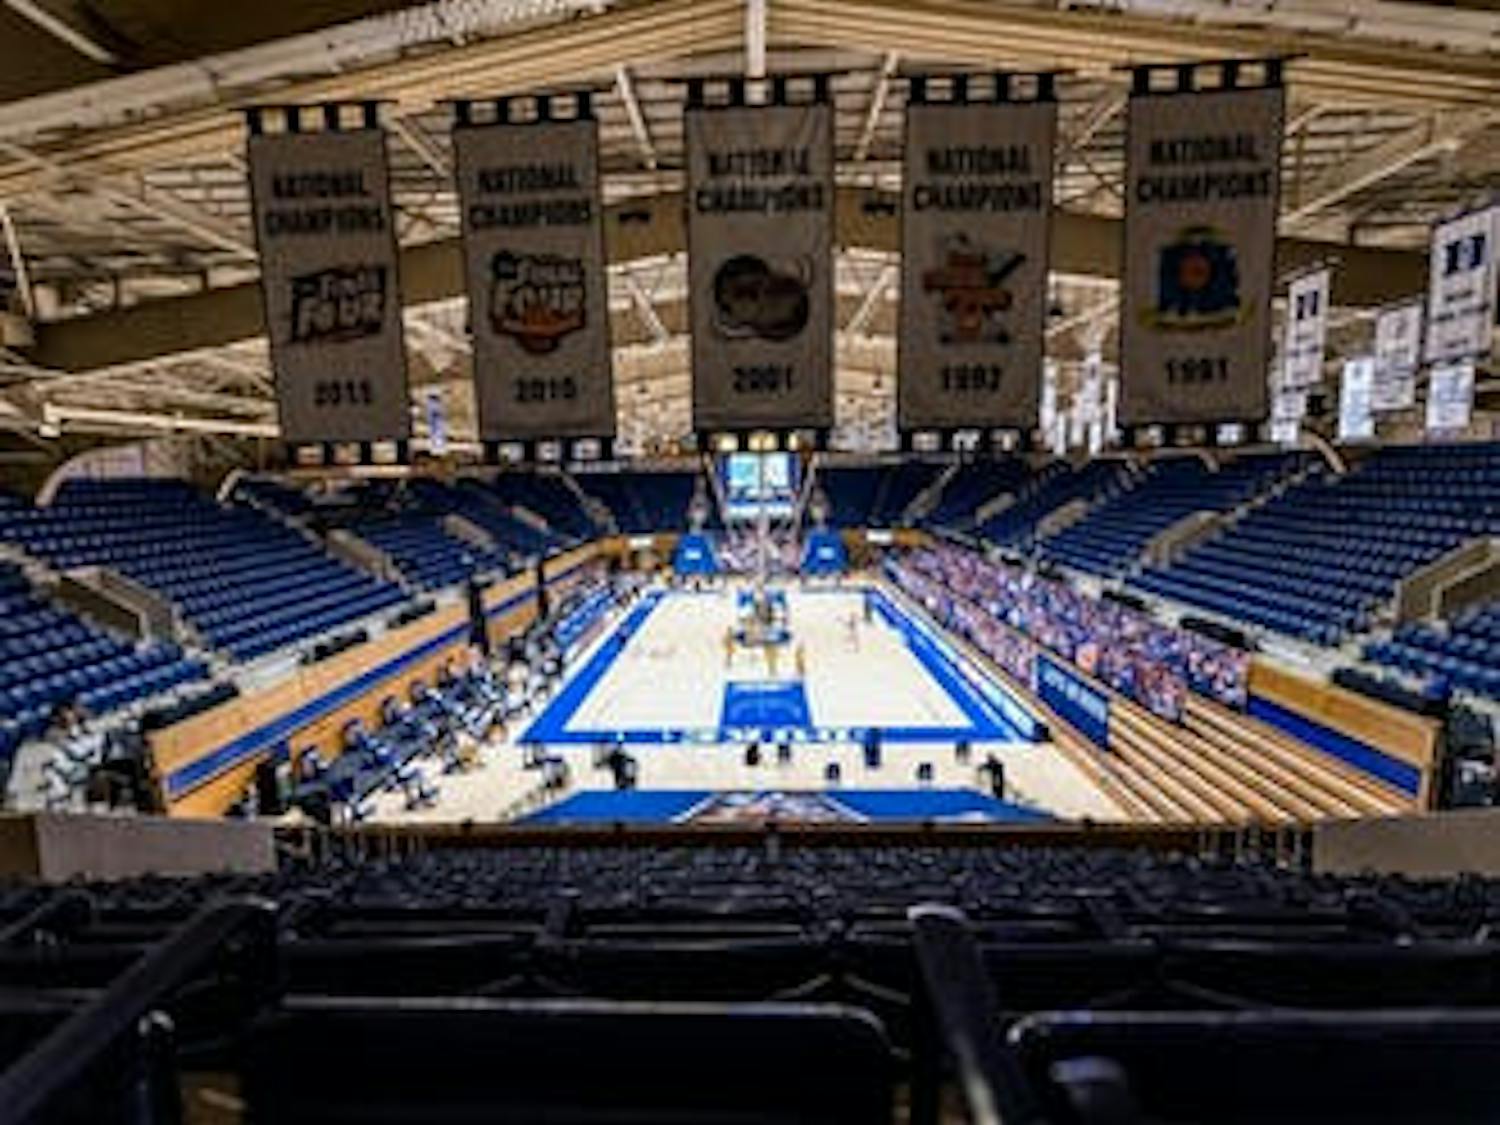 Duke will not travel to Clemson Wednesday due to positive COVID-19 results within its program.